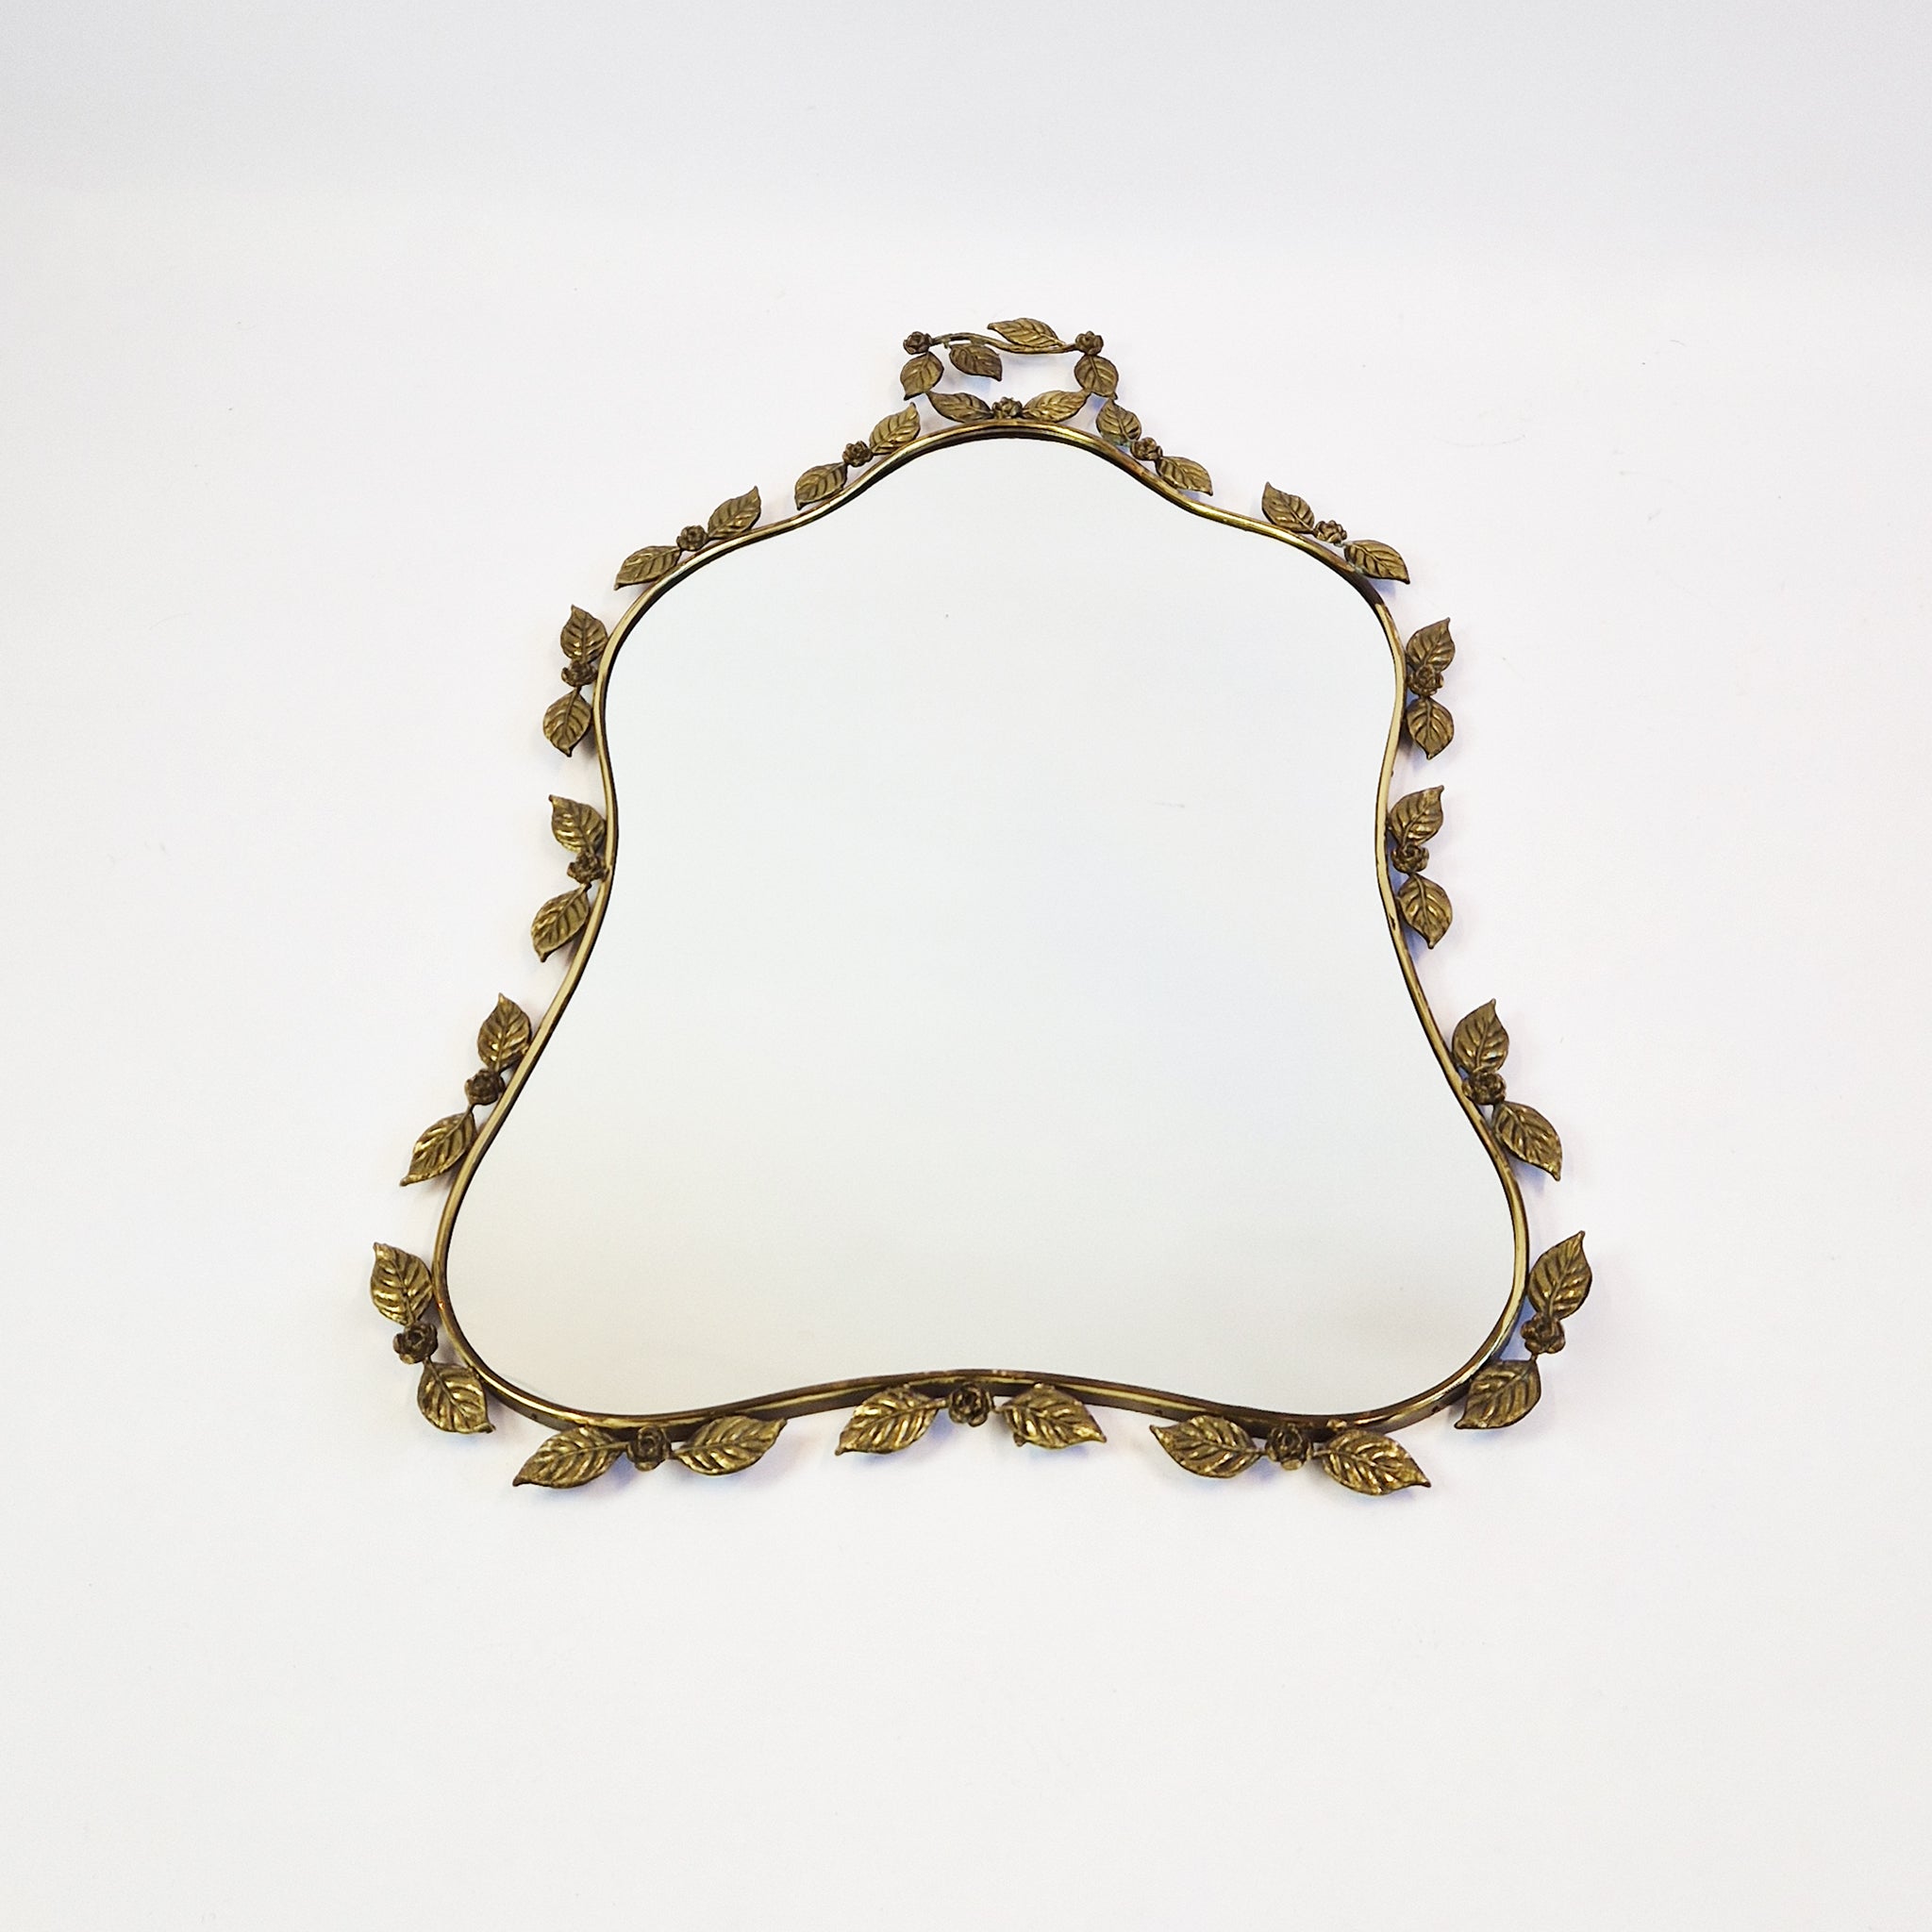 1950s Italian brass mirror with floral design